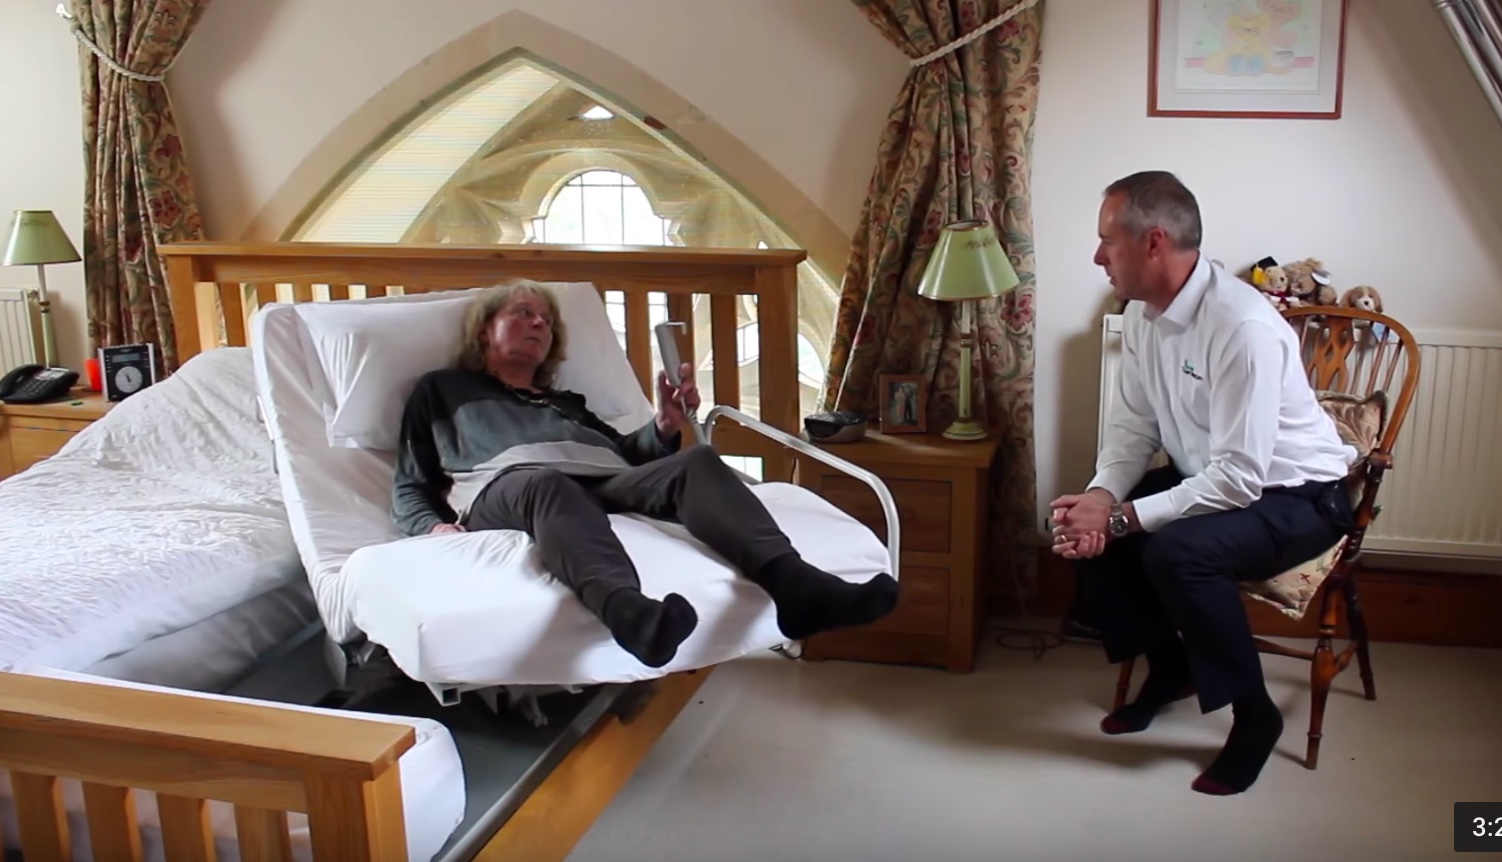 Sarah who lives with Multiple Sclerosis explains how her Rotoflex bed helps maintain her independence